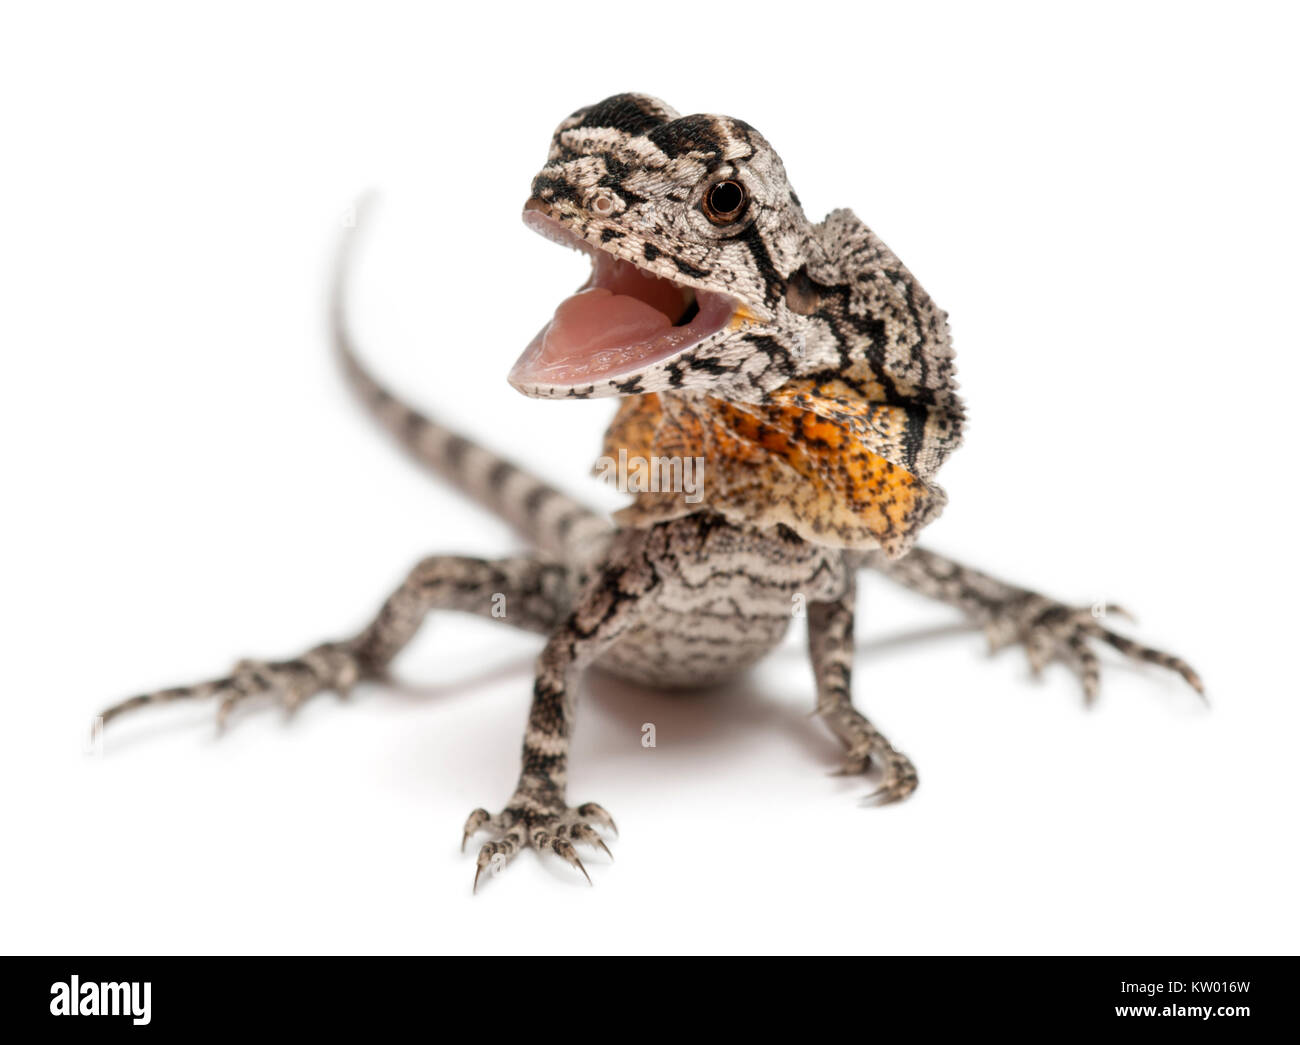 Frill-necked lizard also known as the frilled lizard, Chlamydosaurus kingii, in front of white background Stock Photo